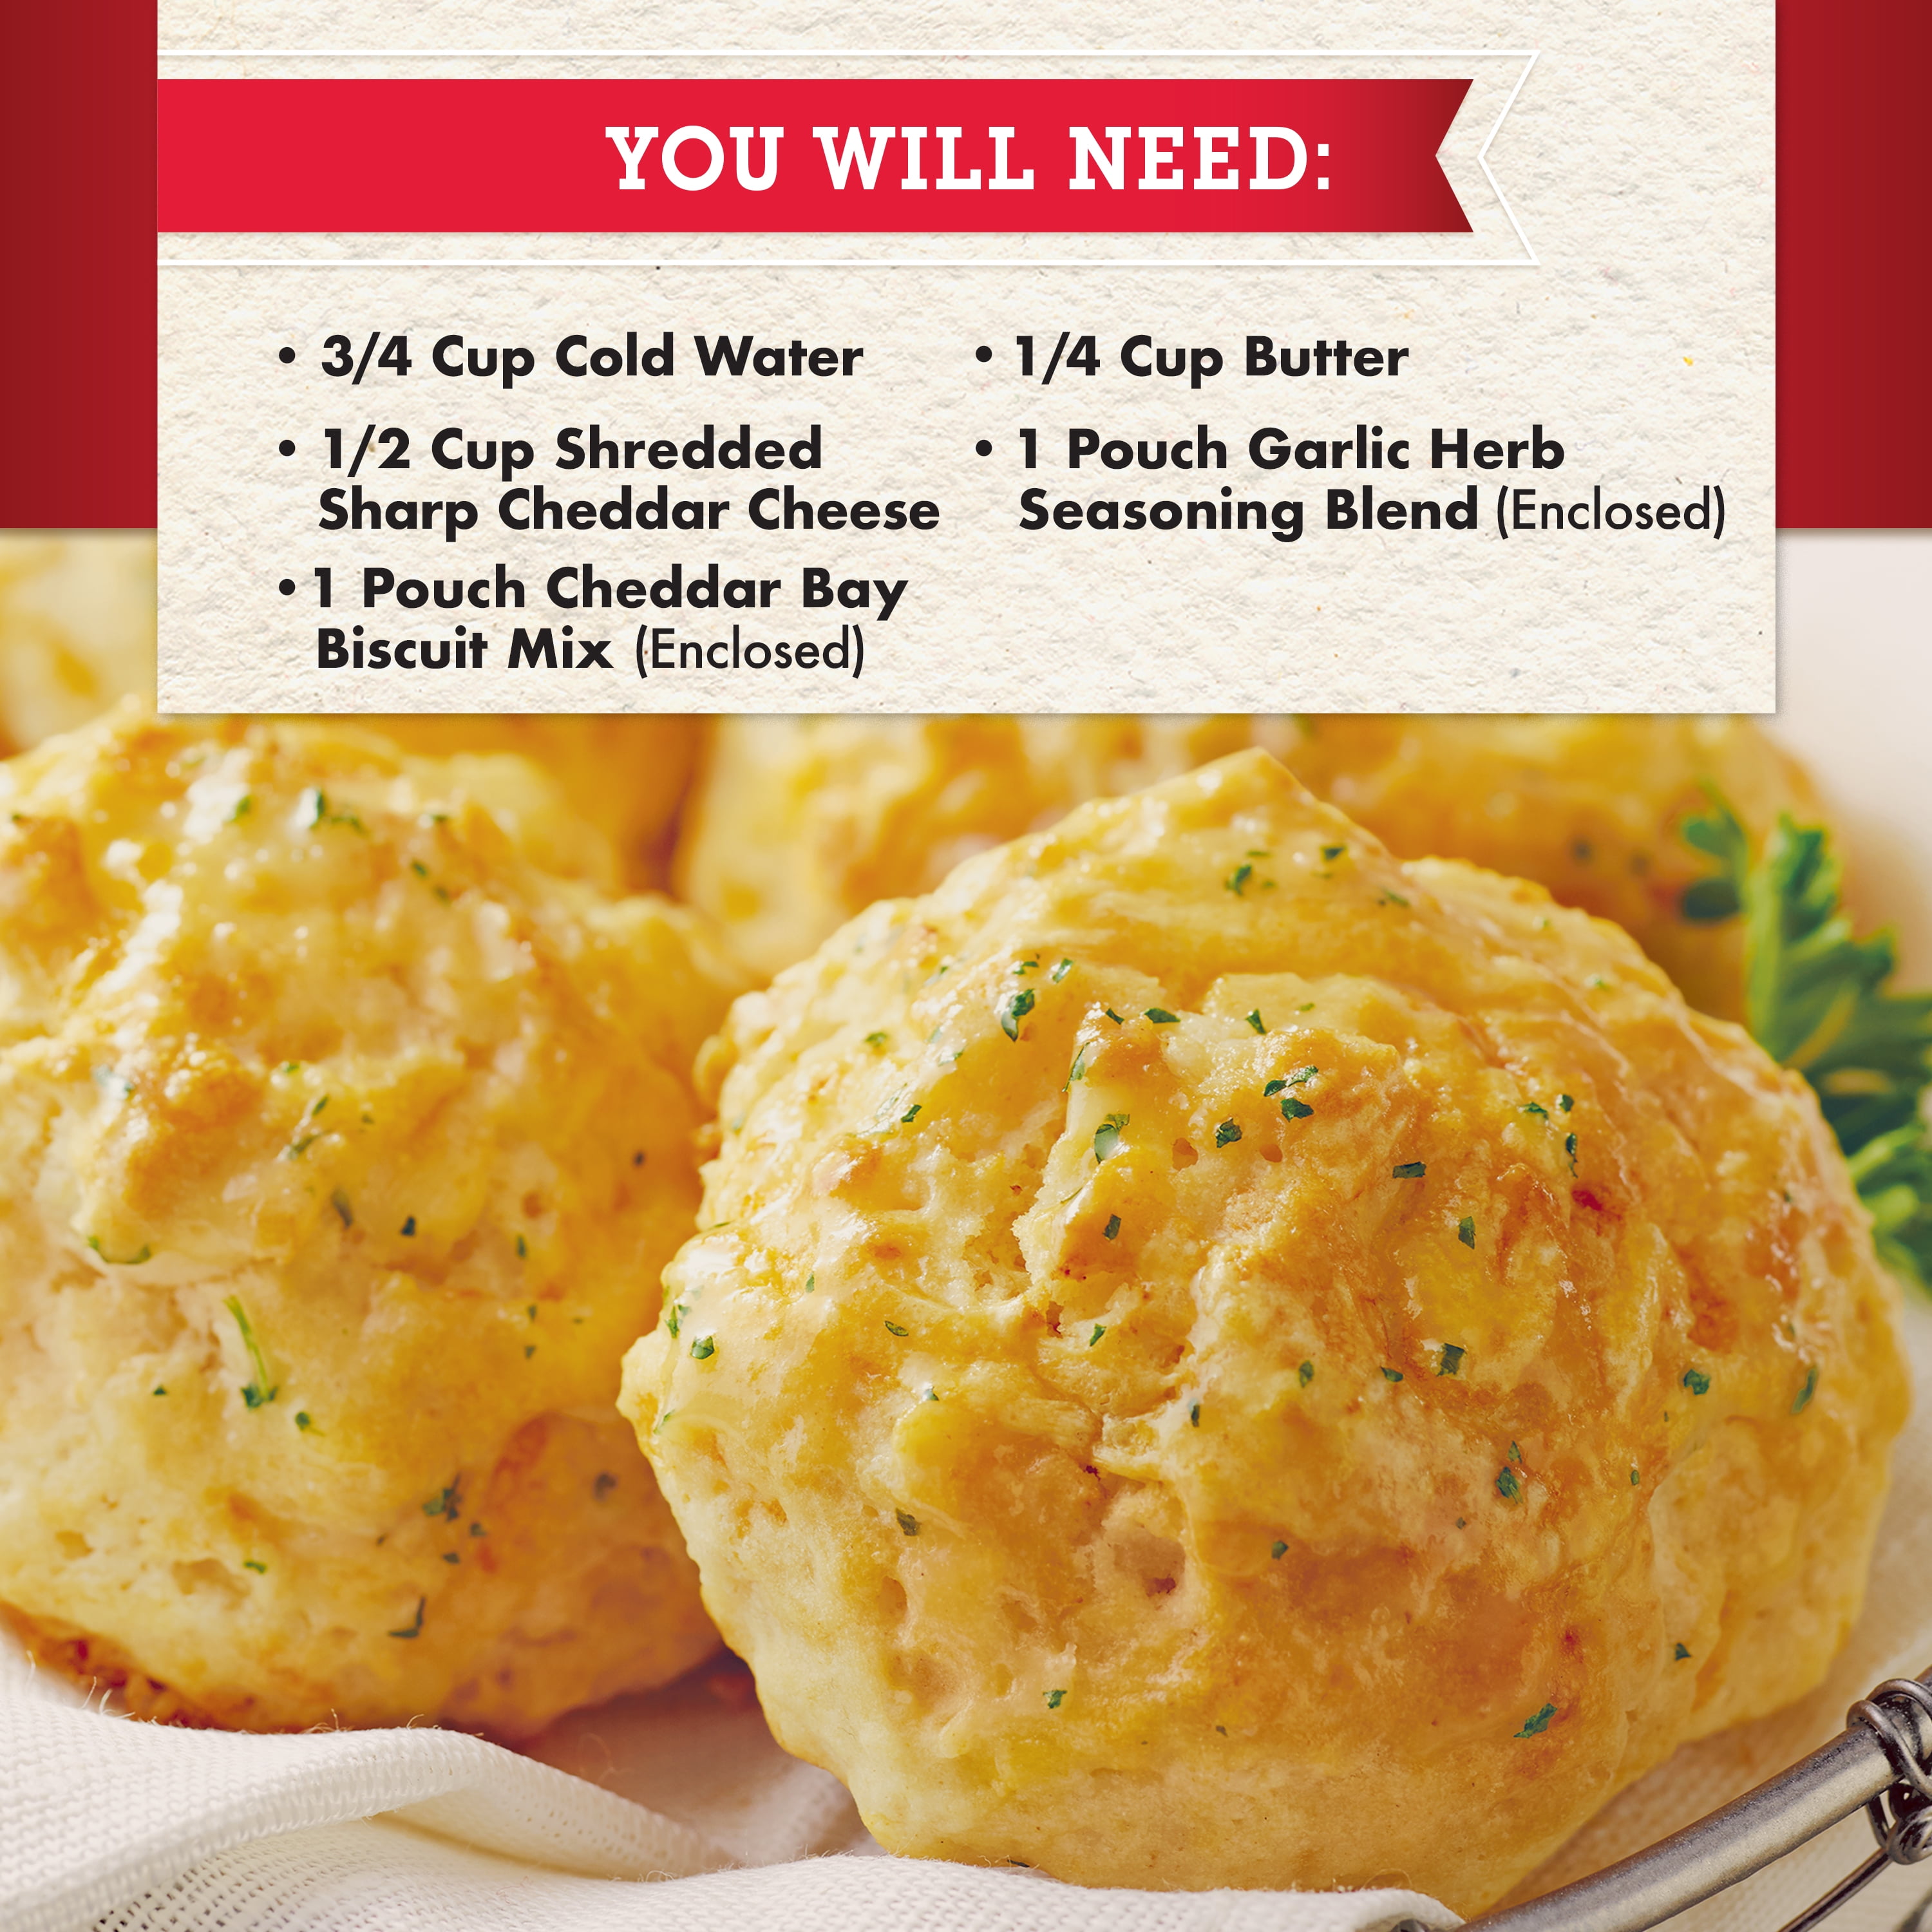 Have you ever tried to make Red lobster cheddar bay biscuits at home? , cheddar bay biscuit